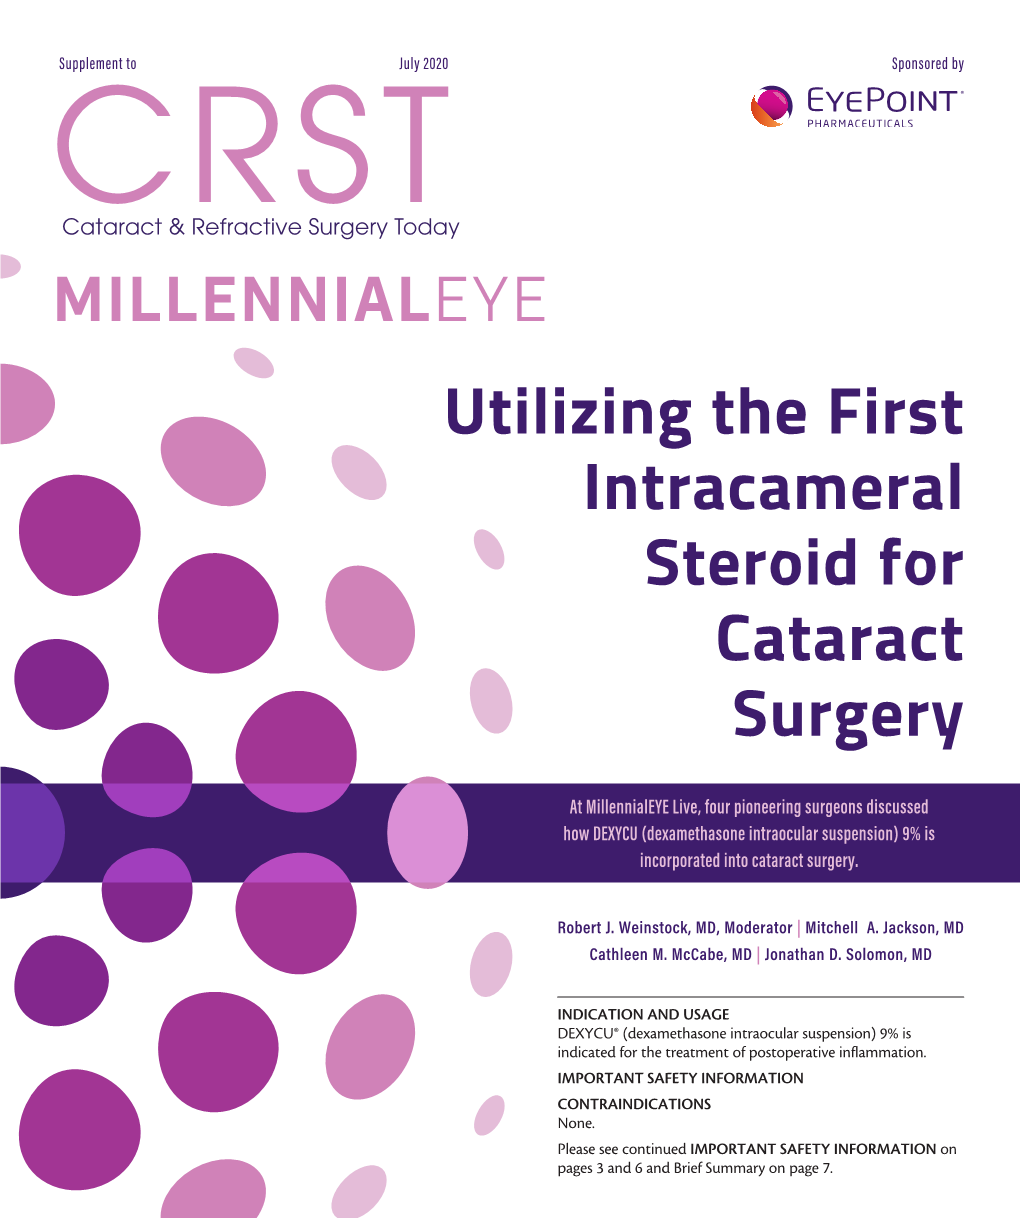 Utilizing the First Intracameral Steroid for Cataract Surgery